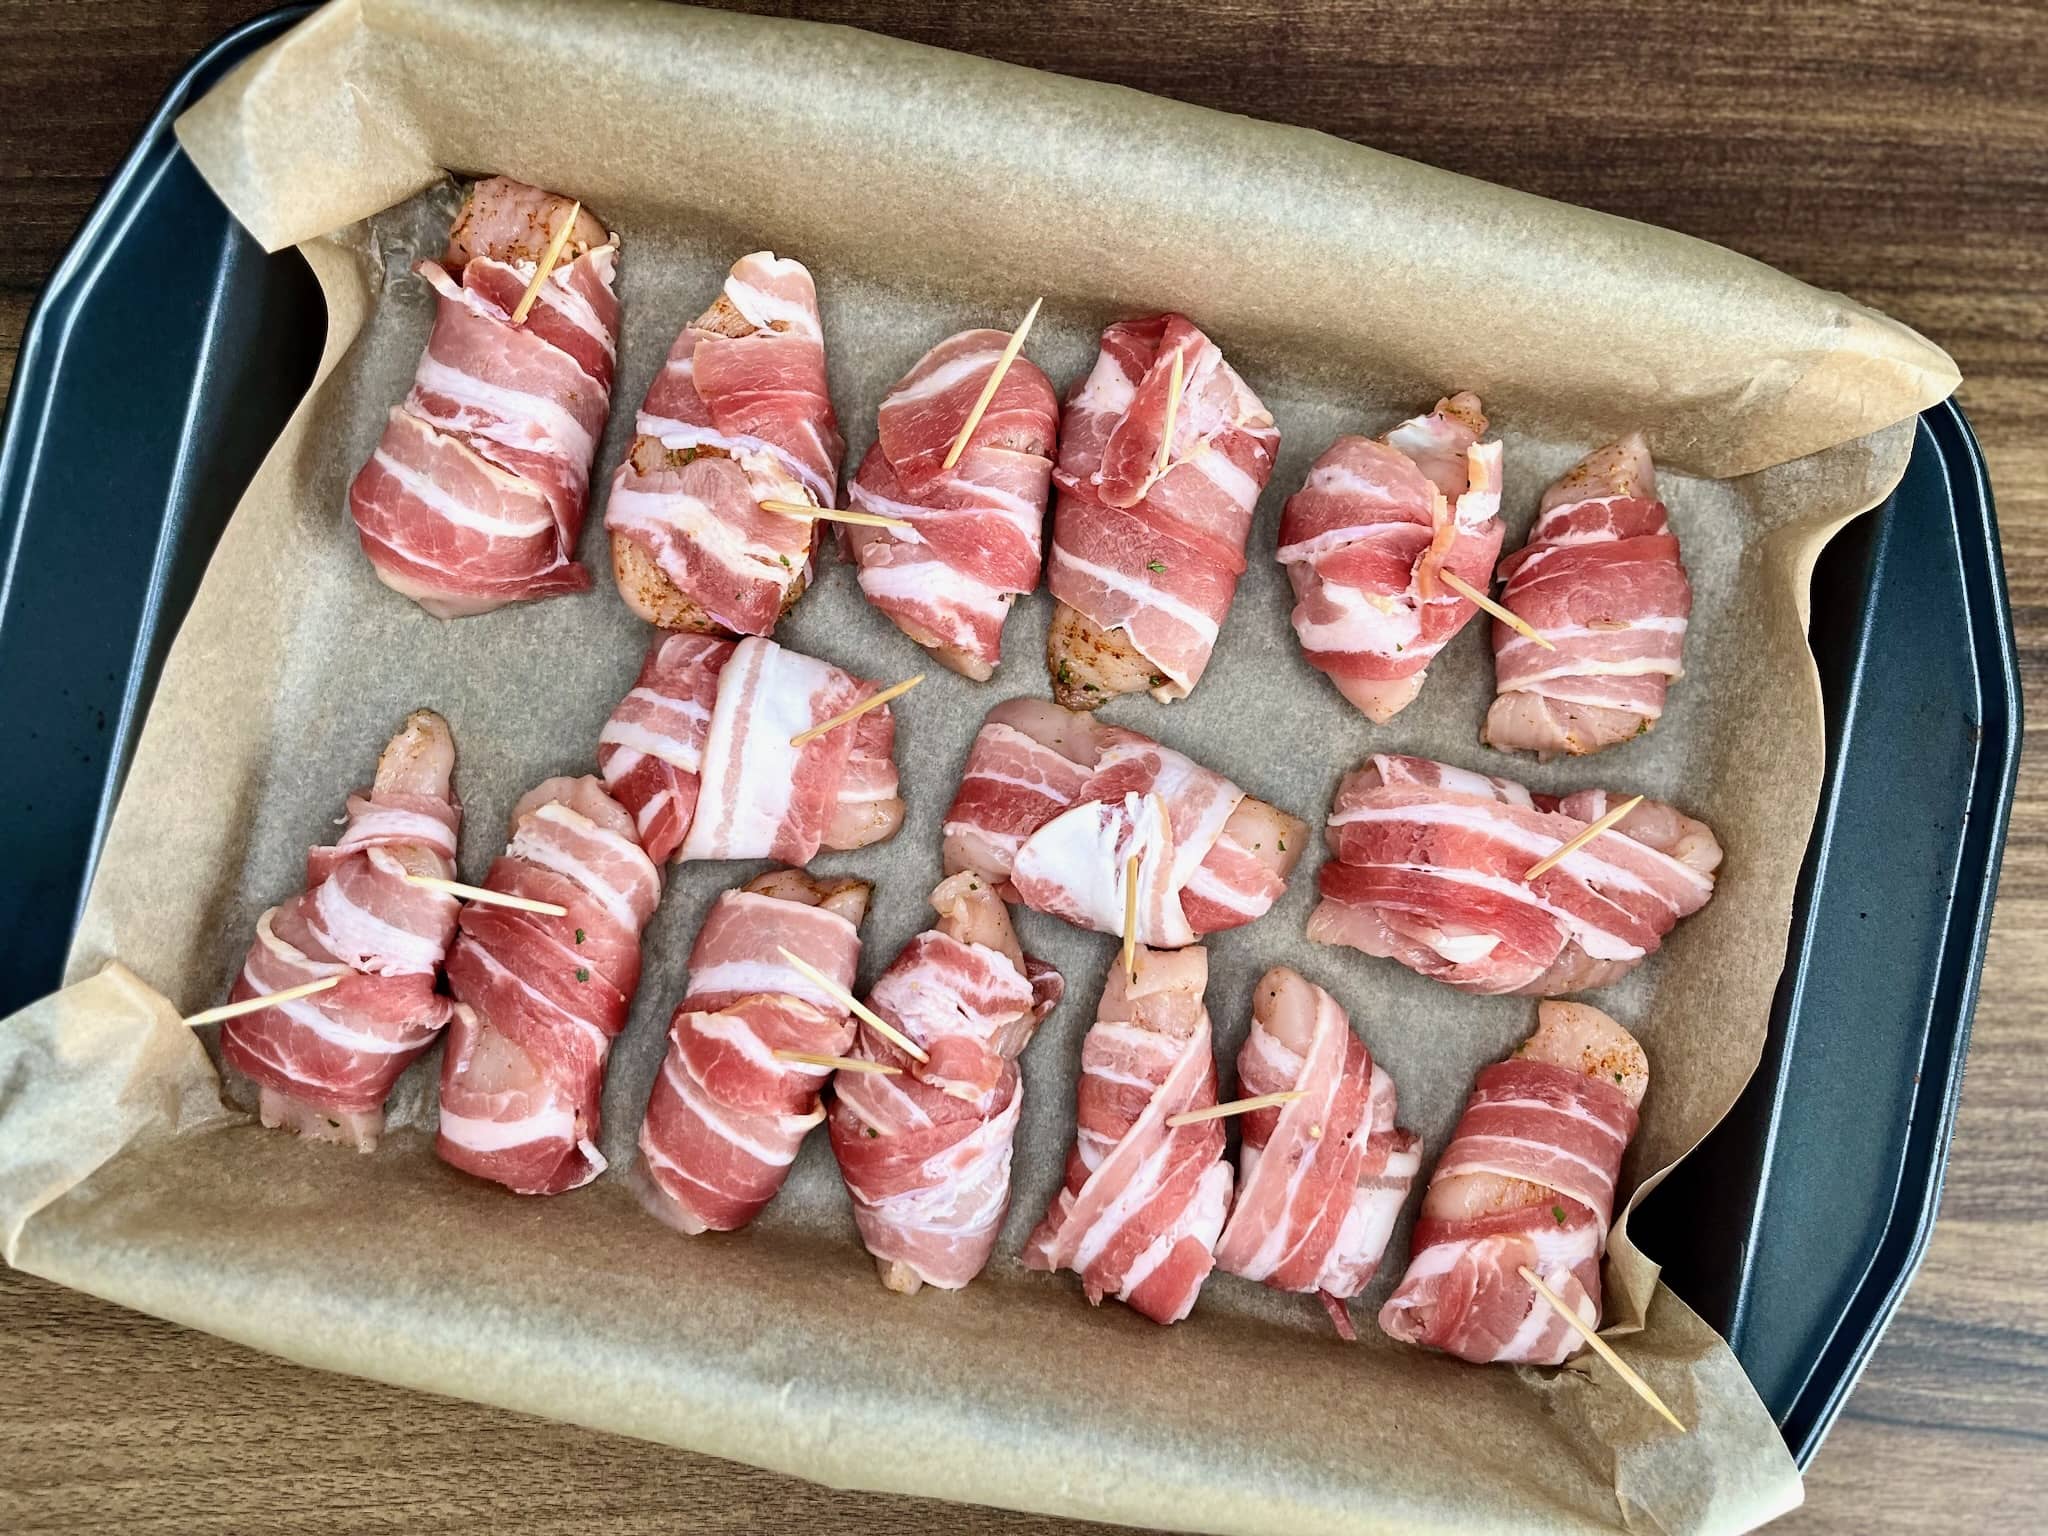 Bacon-wrapped chicken bites, ready for baking, await their transformation into crispy, flavorful appetizers